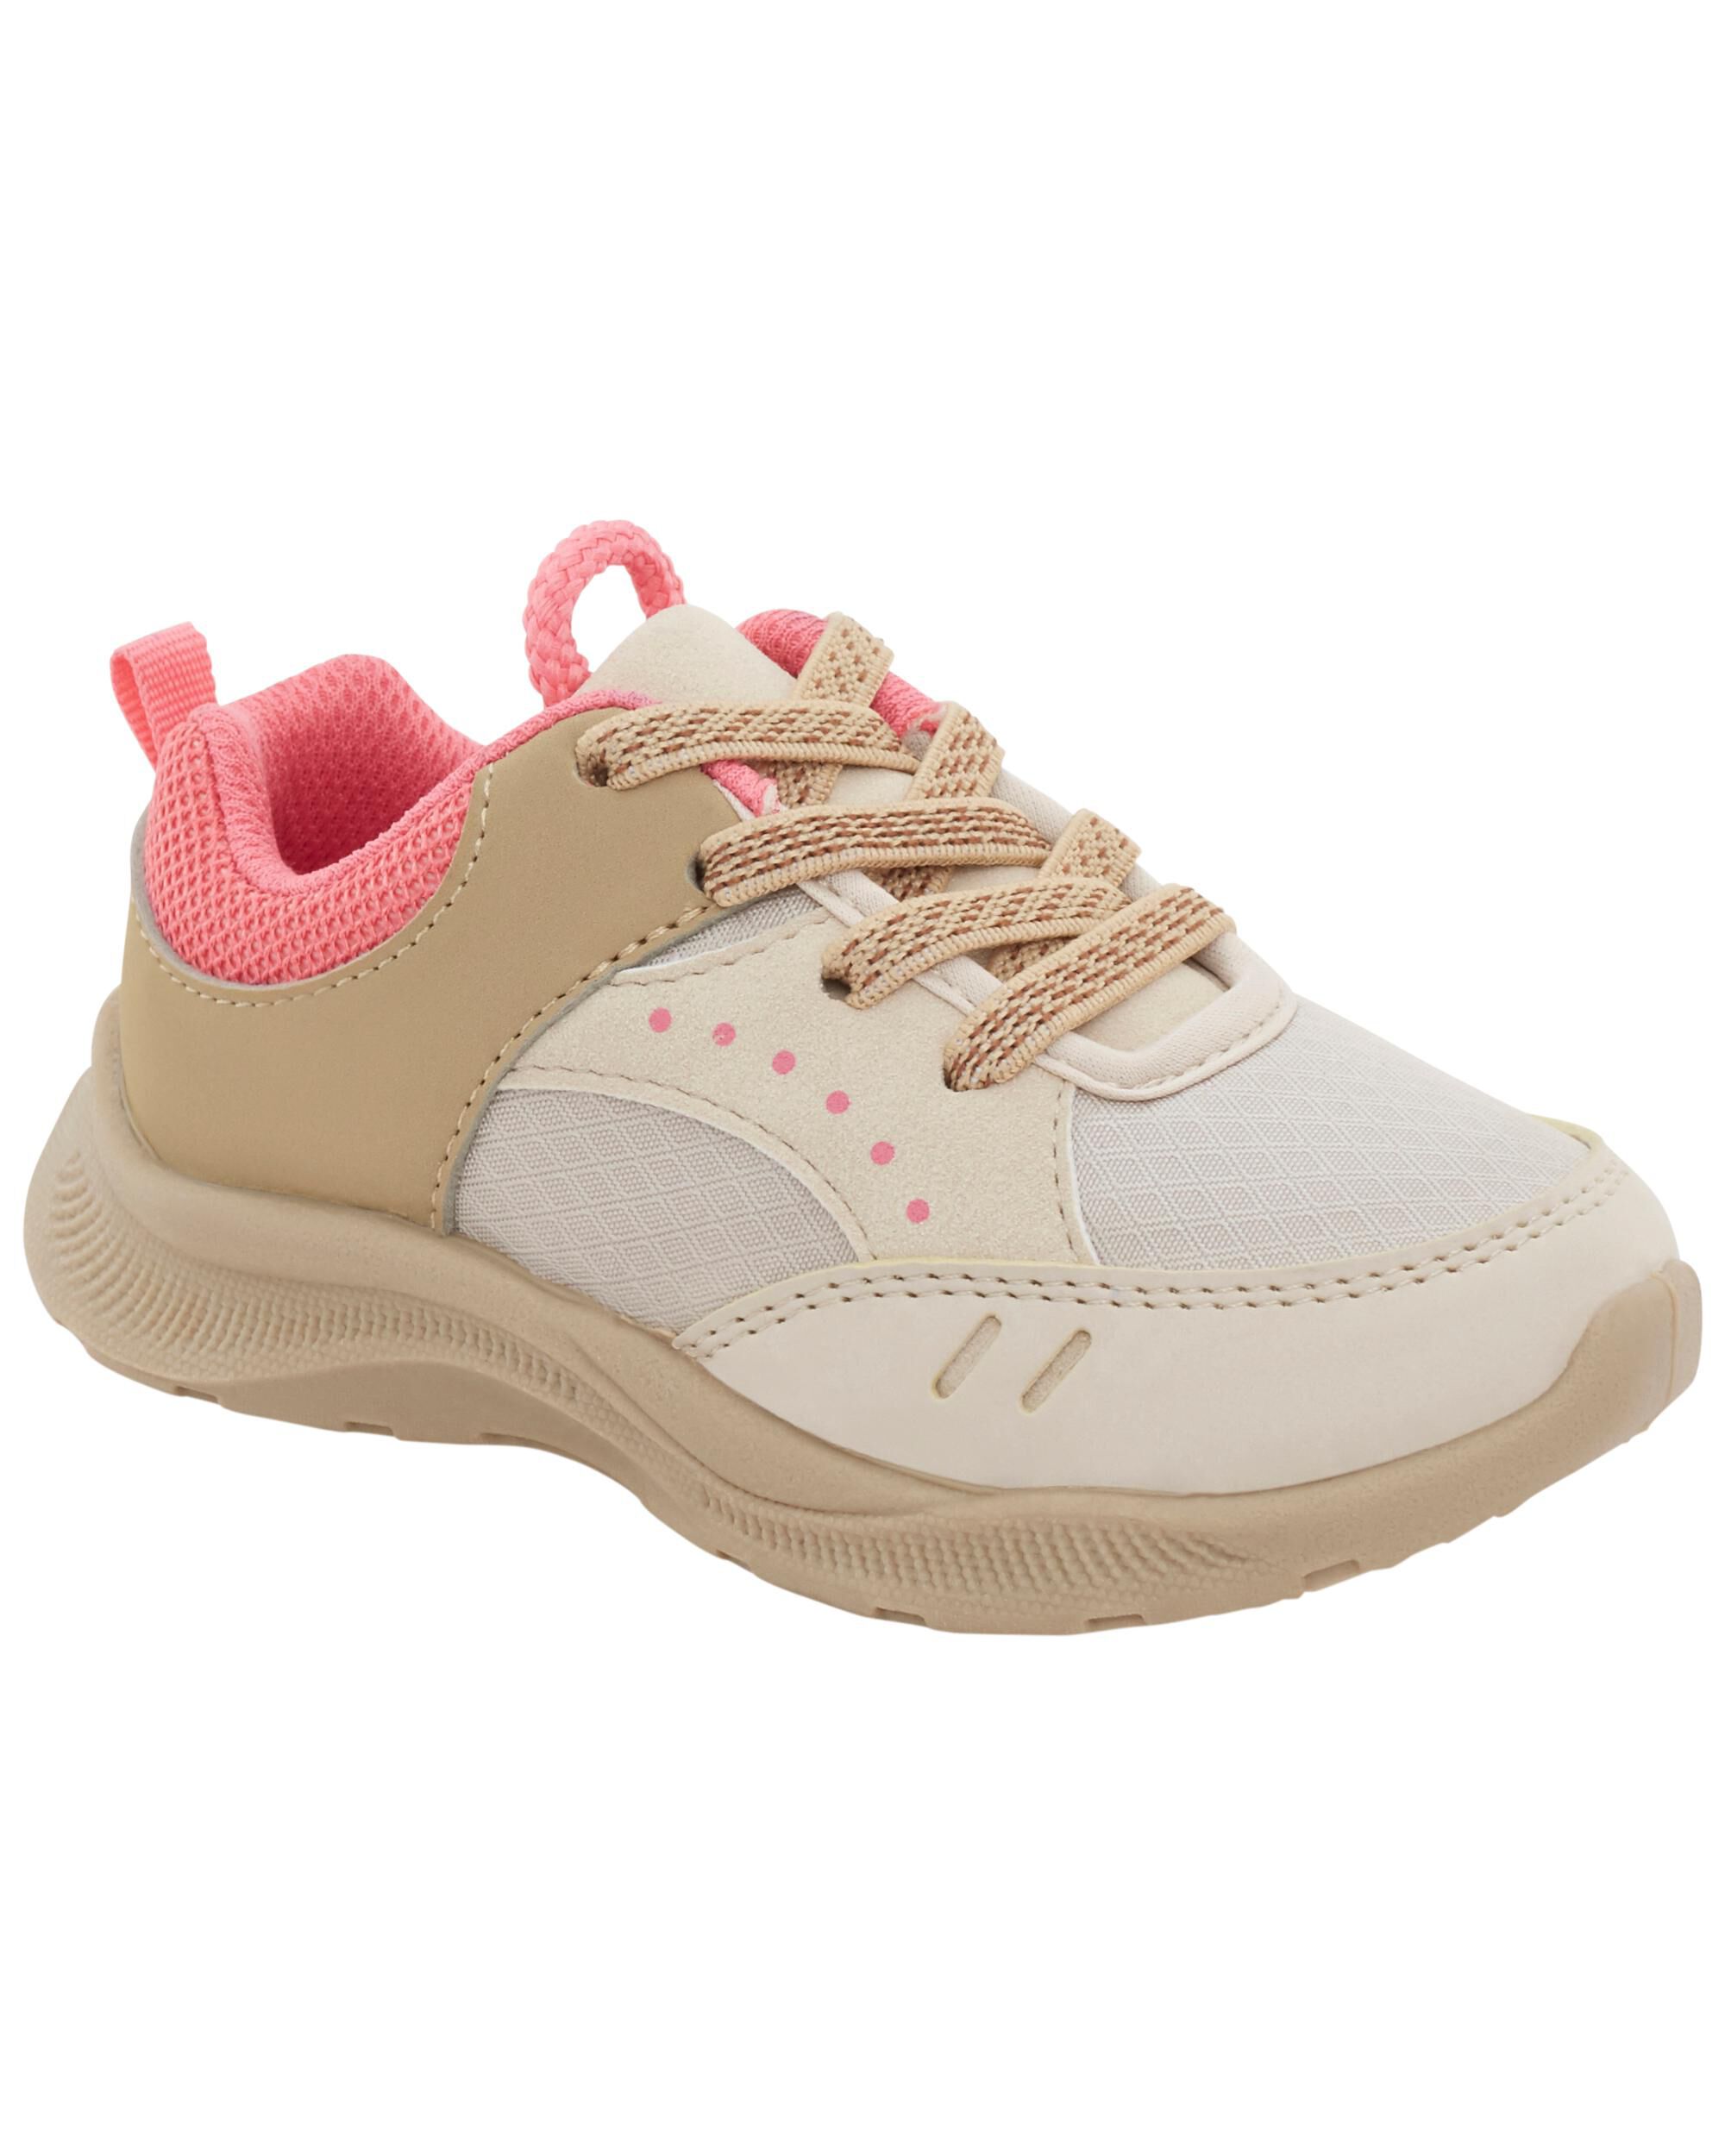 Carters Toddler Pull-On Color Block Sneakers